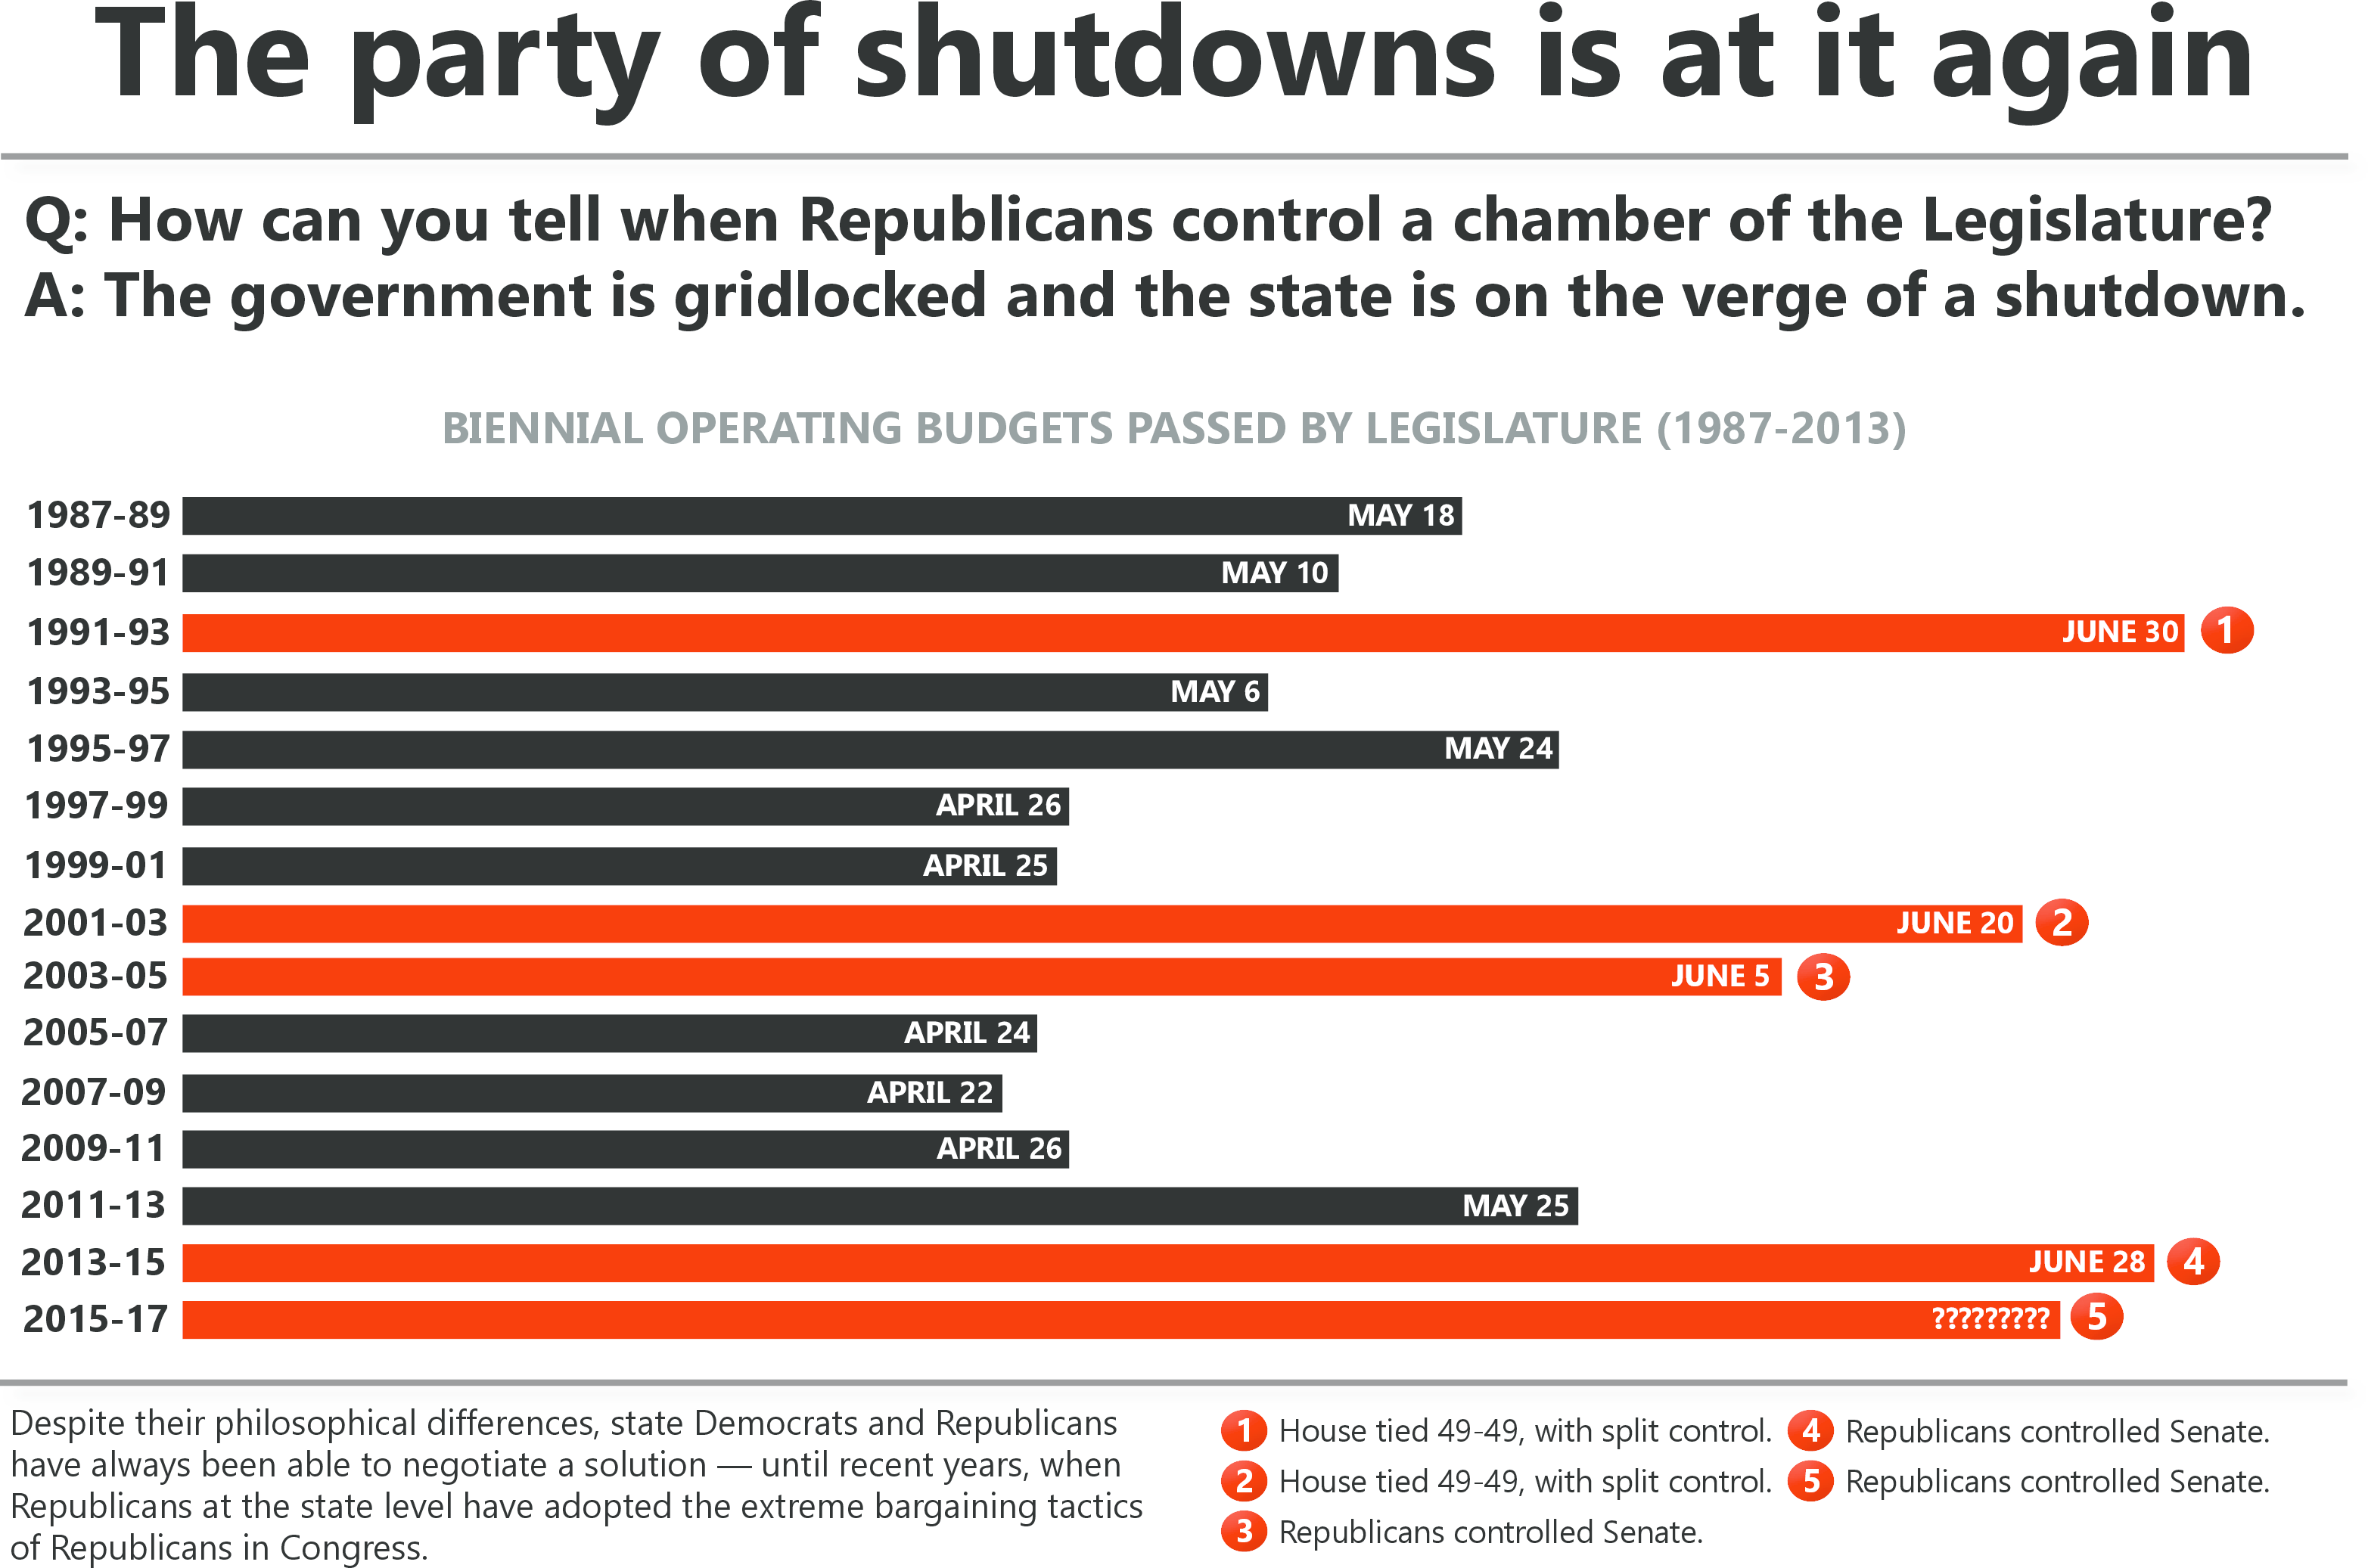 The party of shutdowns is at it again